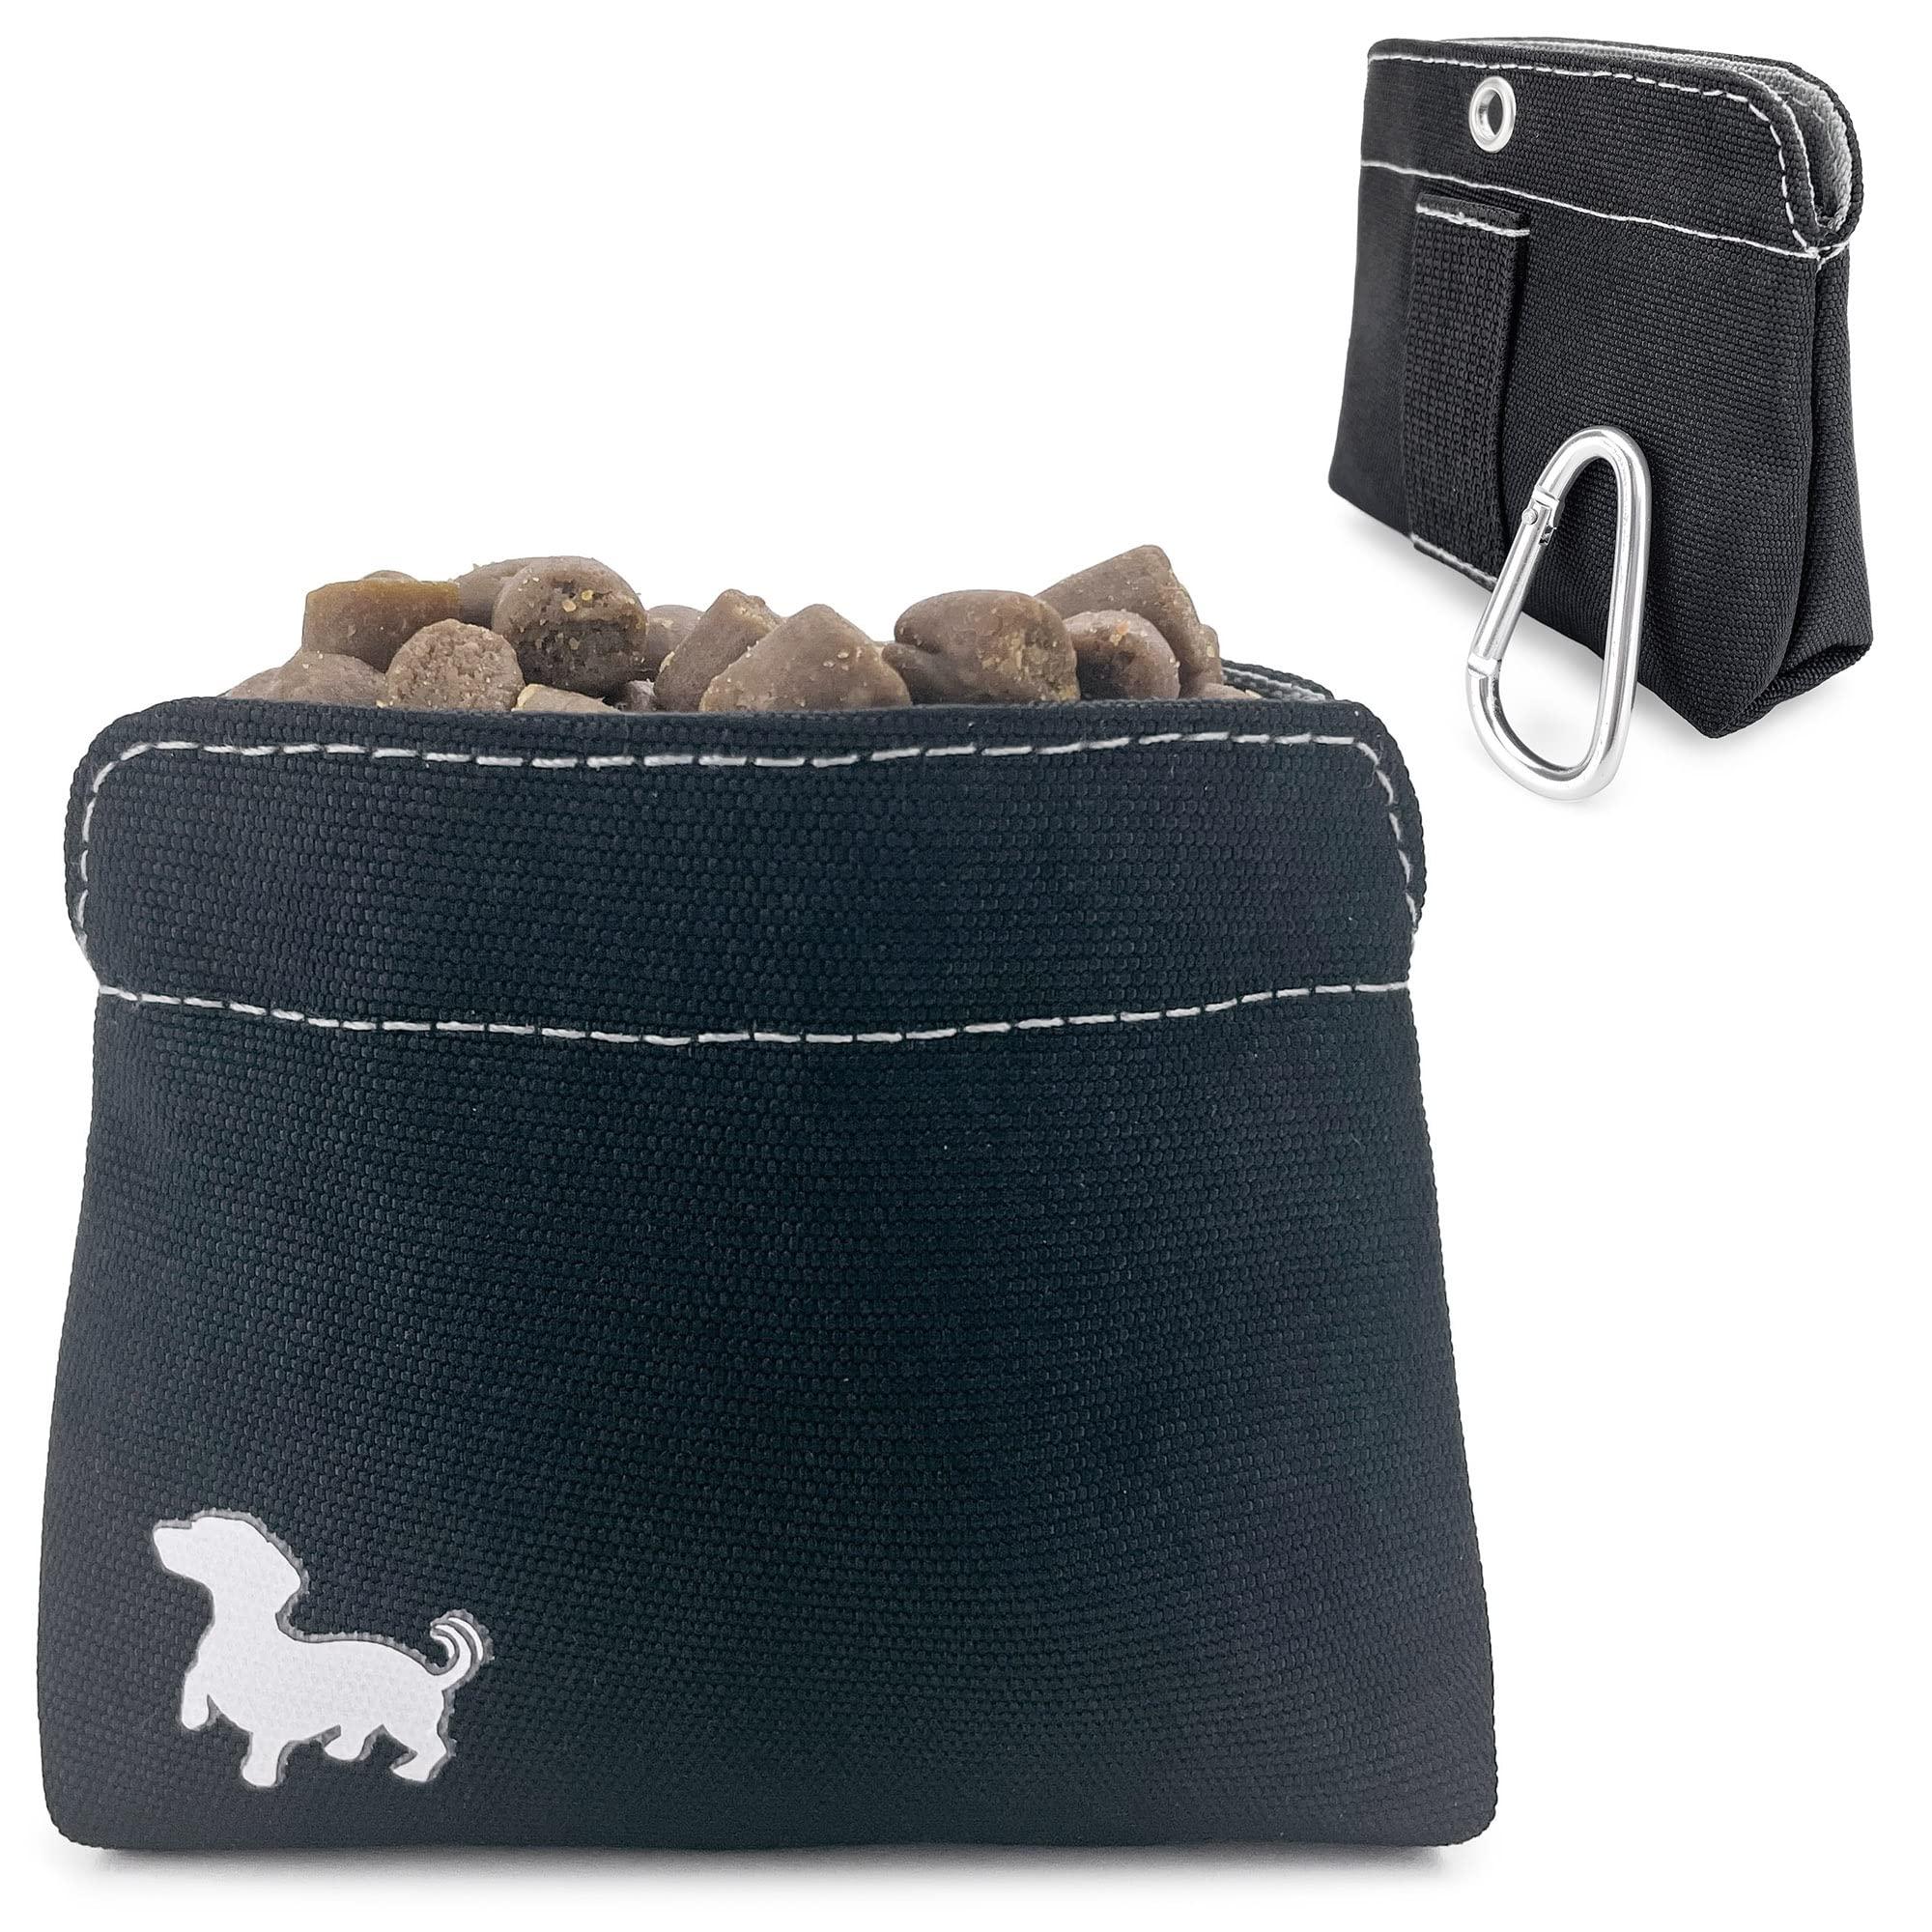 Swaggly Pocket Sized Dog Treat Pouch - Treat Pouches for Pet Training - Dog Treat Pouch Magnetic Closure - Dog Walking Accessories - Black with Gray Interior